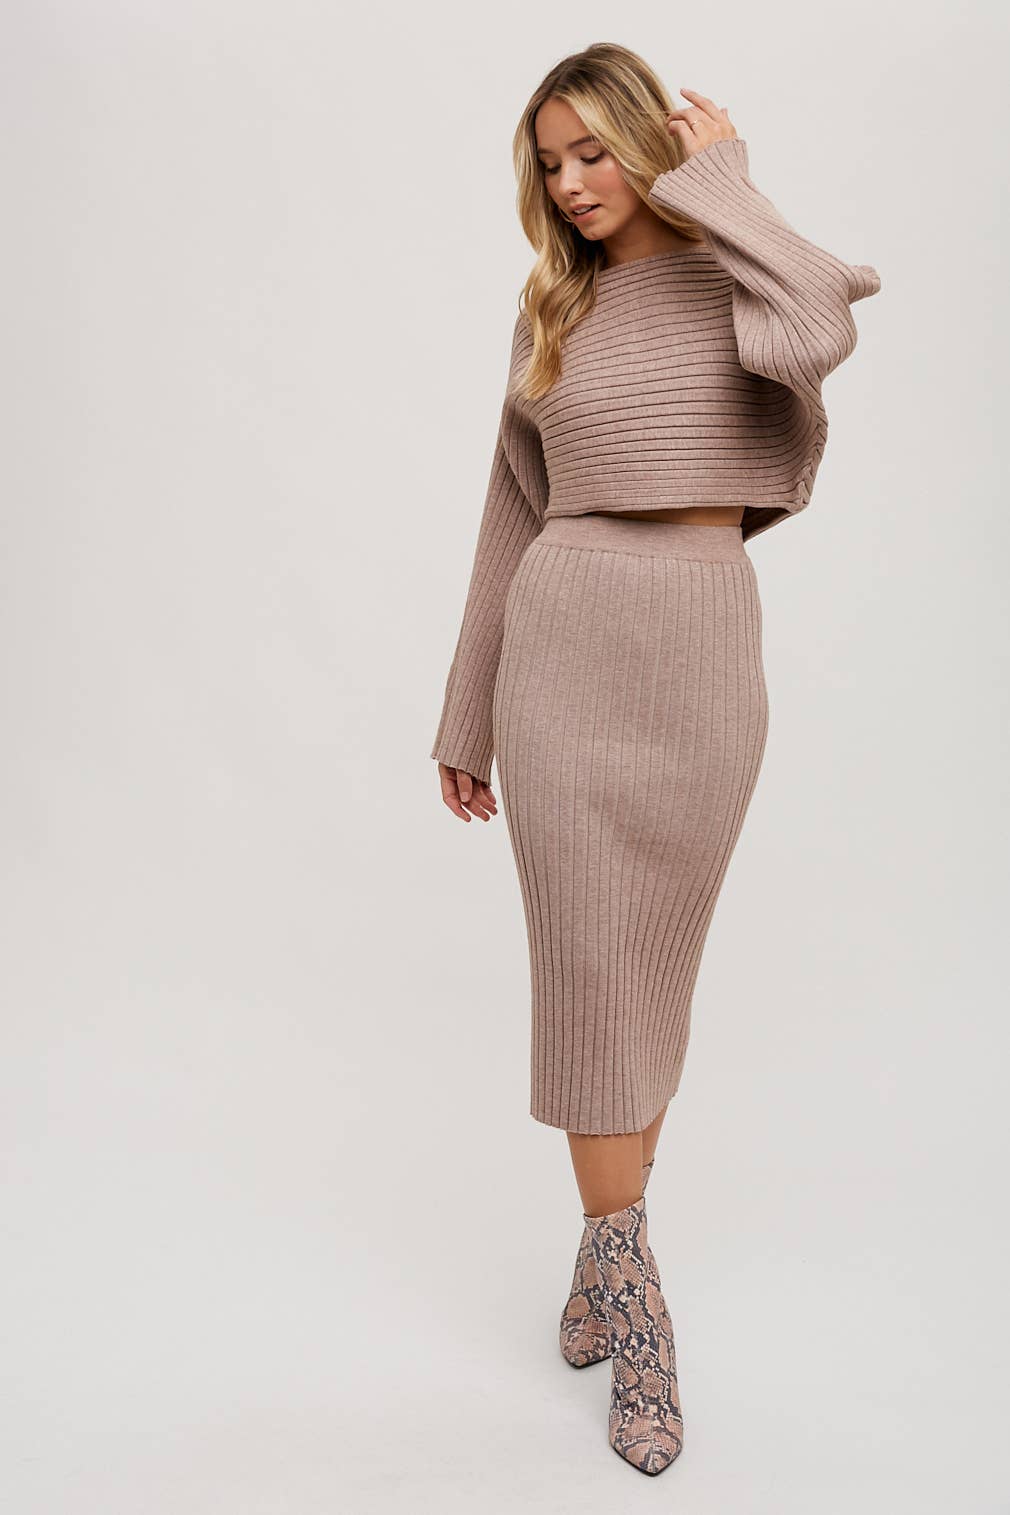 Ribbed knit crop top and midi pencil skirt set  - Black and Latte